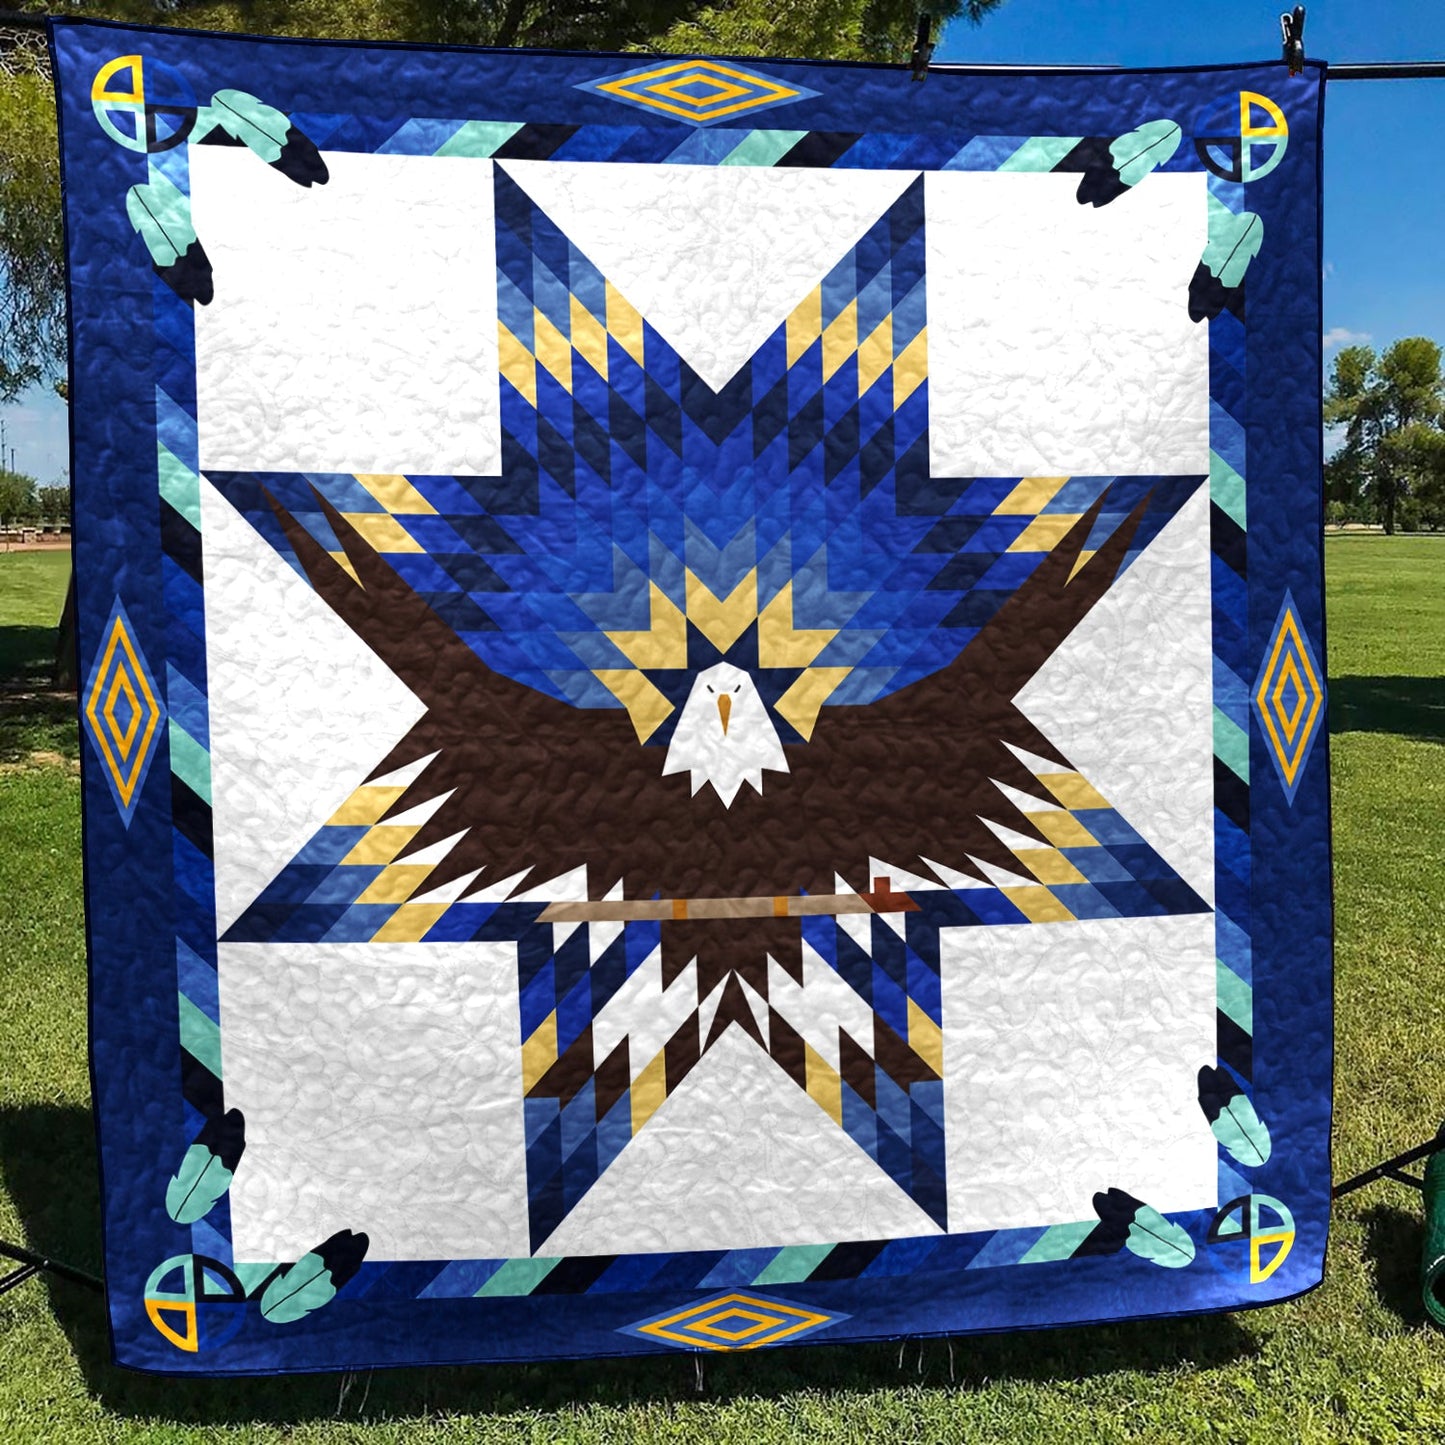 Native American Inspired Blue Eagle Art Quilt HM03082301BL